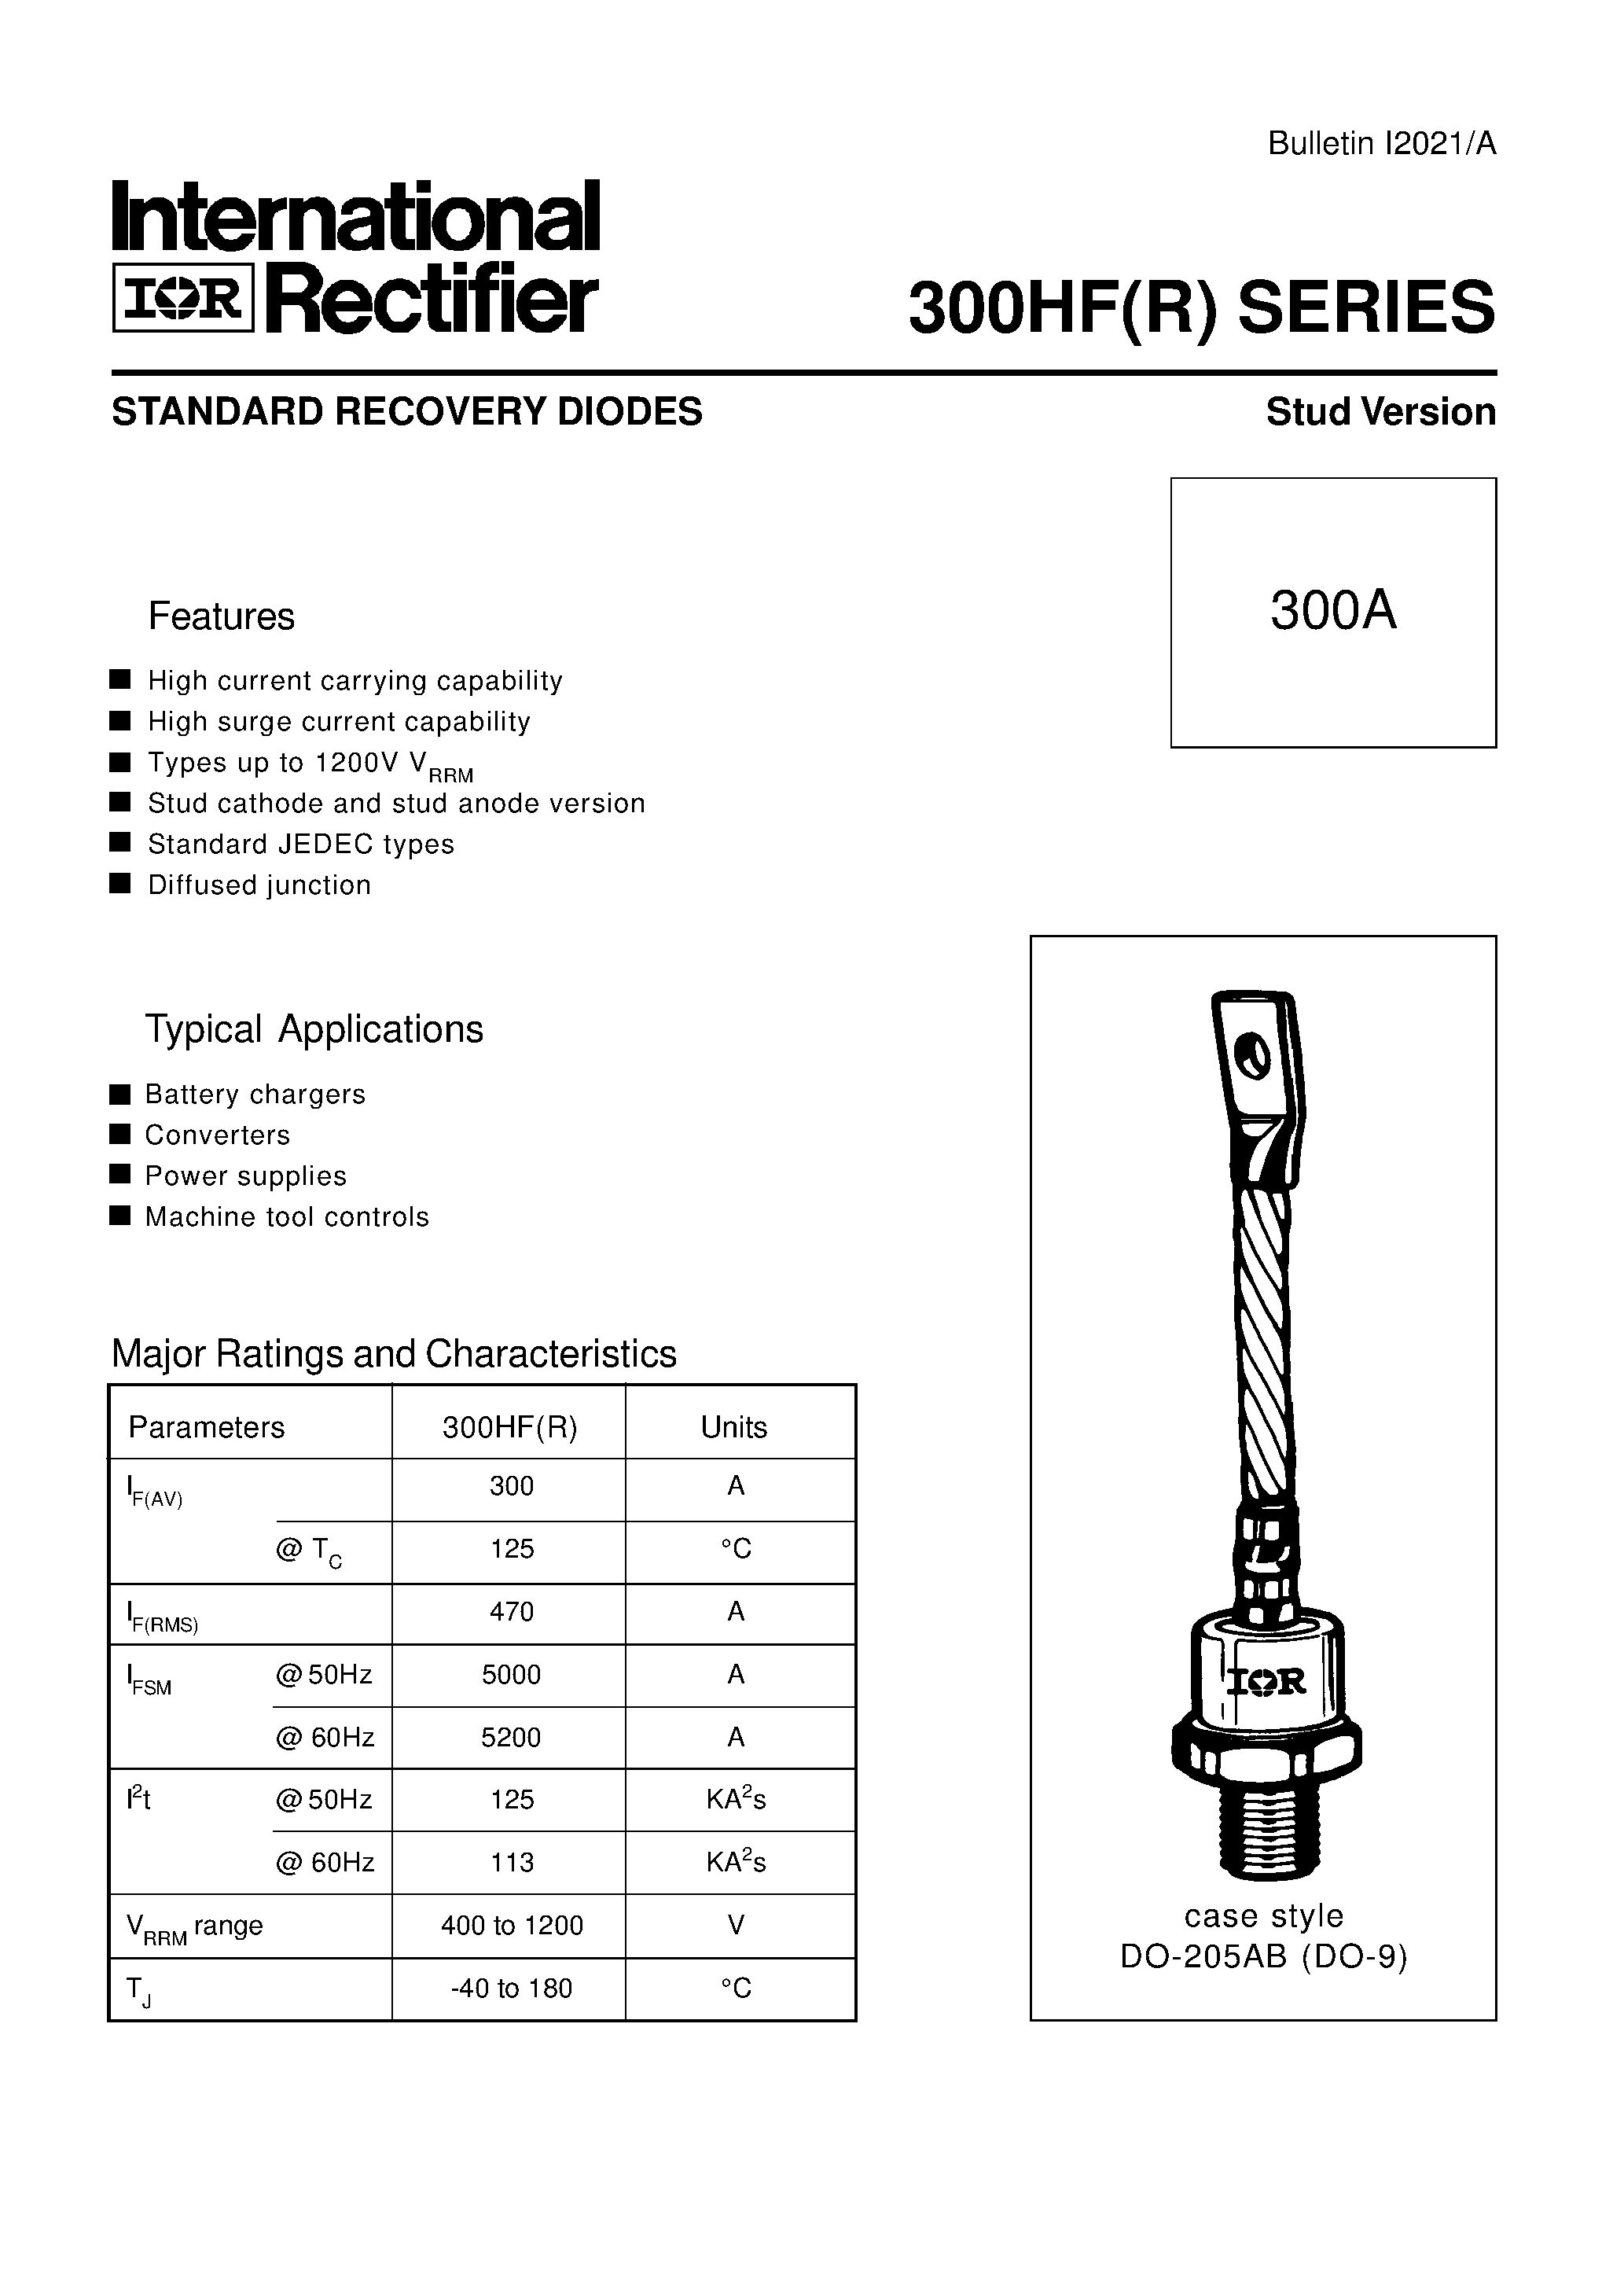 Datasheet 300HF(R) - STANDARD RECOVERY DIODES Stud Version page 1